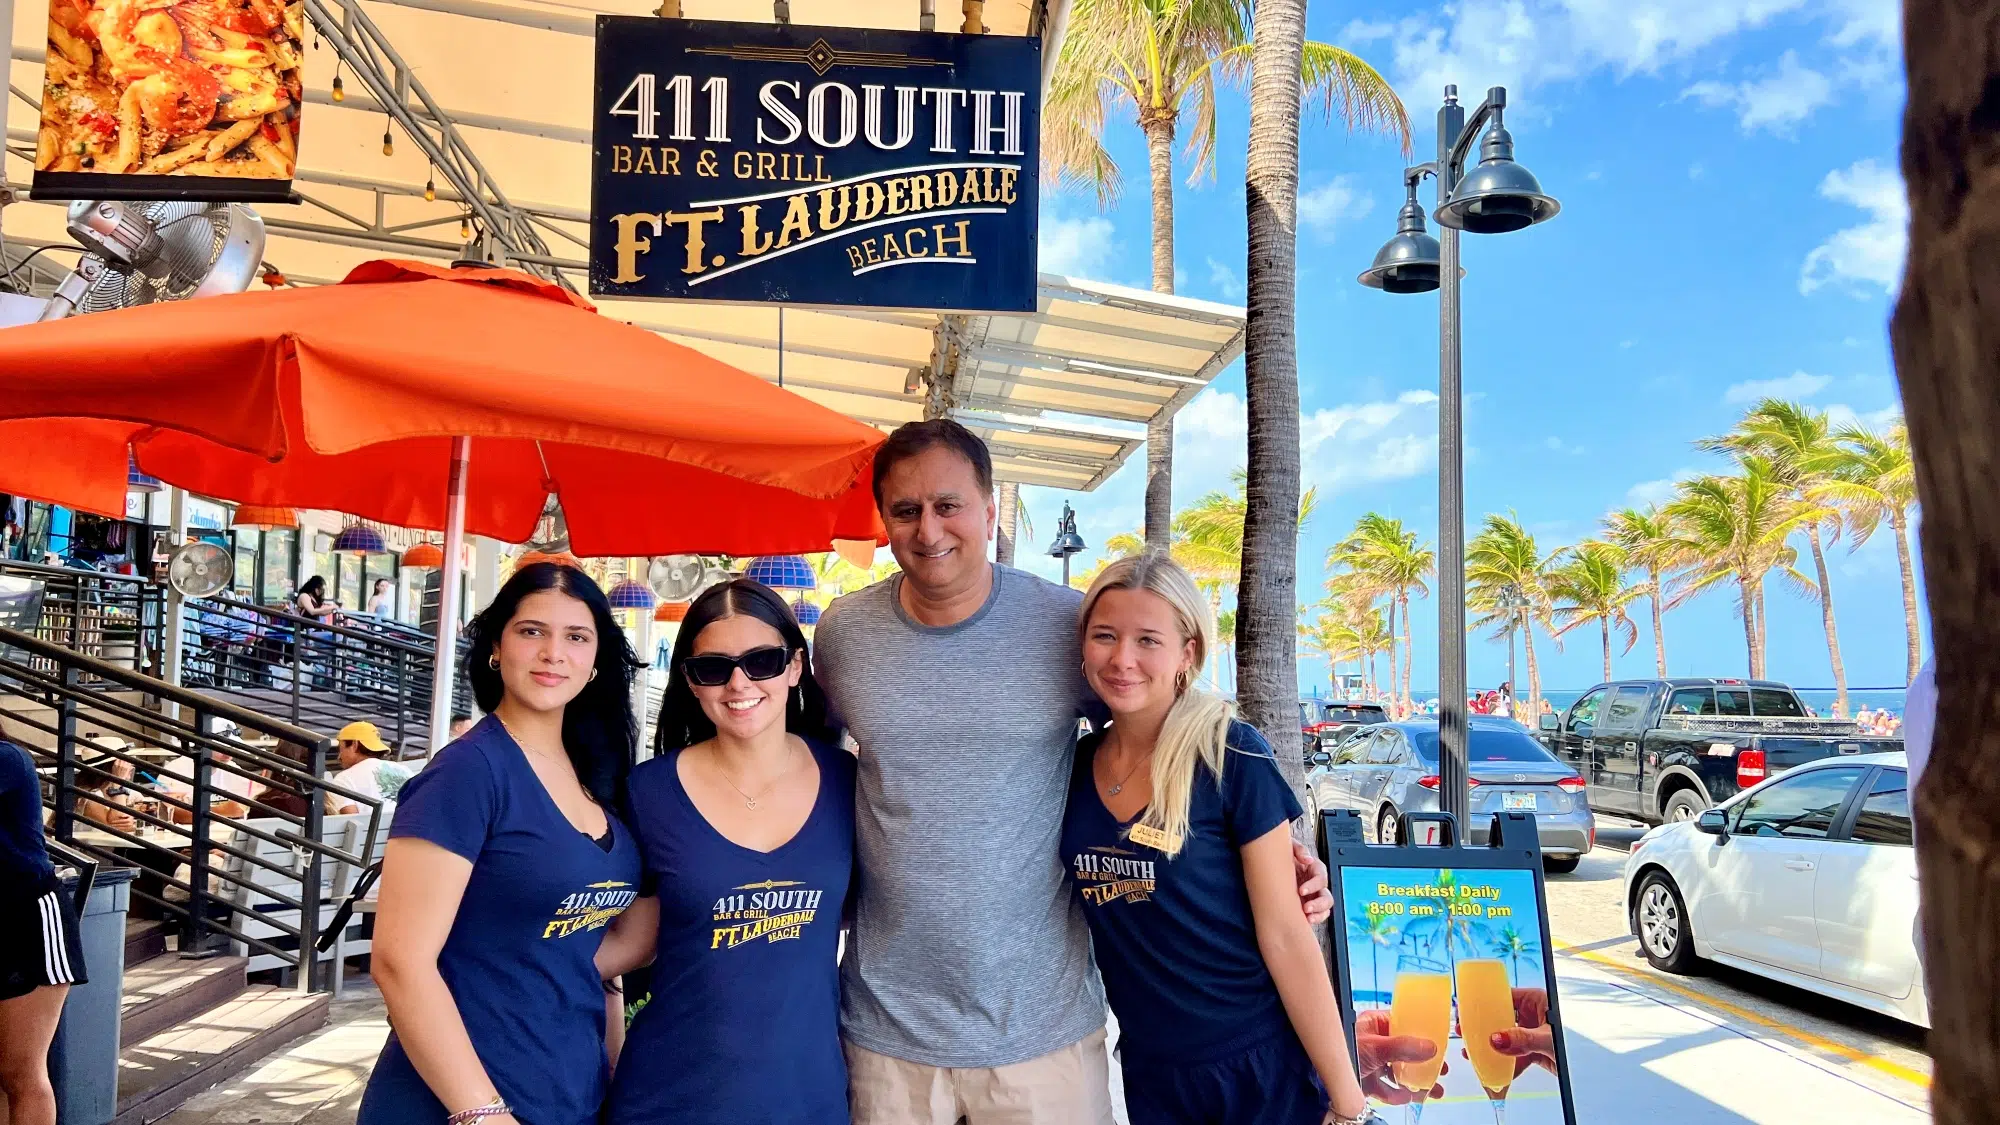 411 South Bar & Grill in Fort Lauderdale